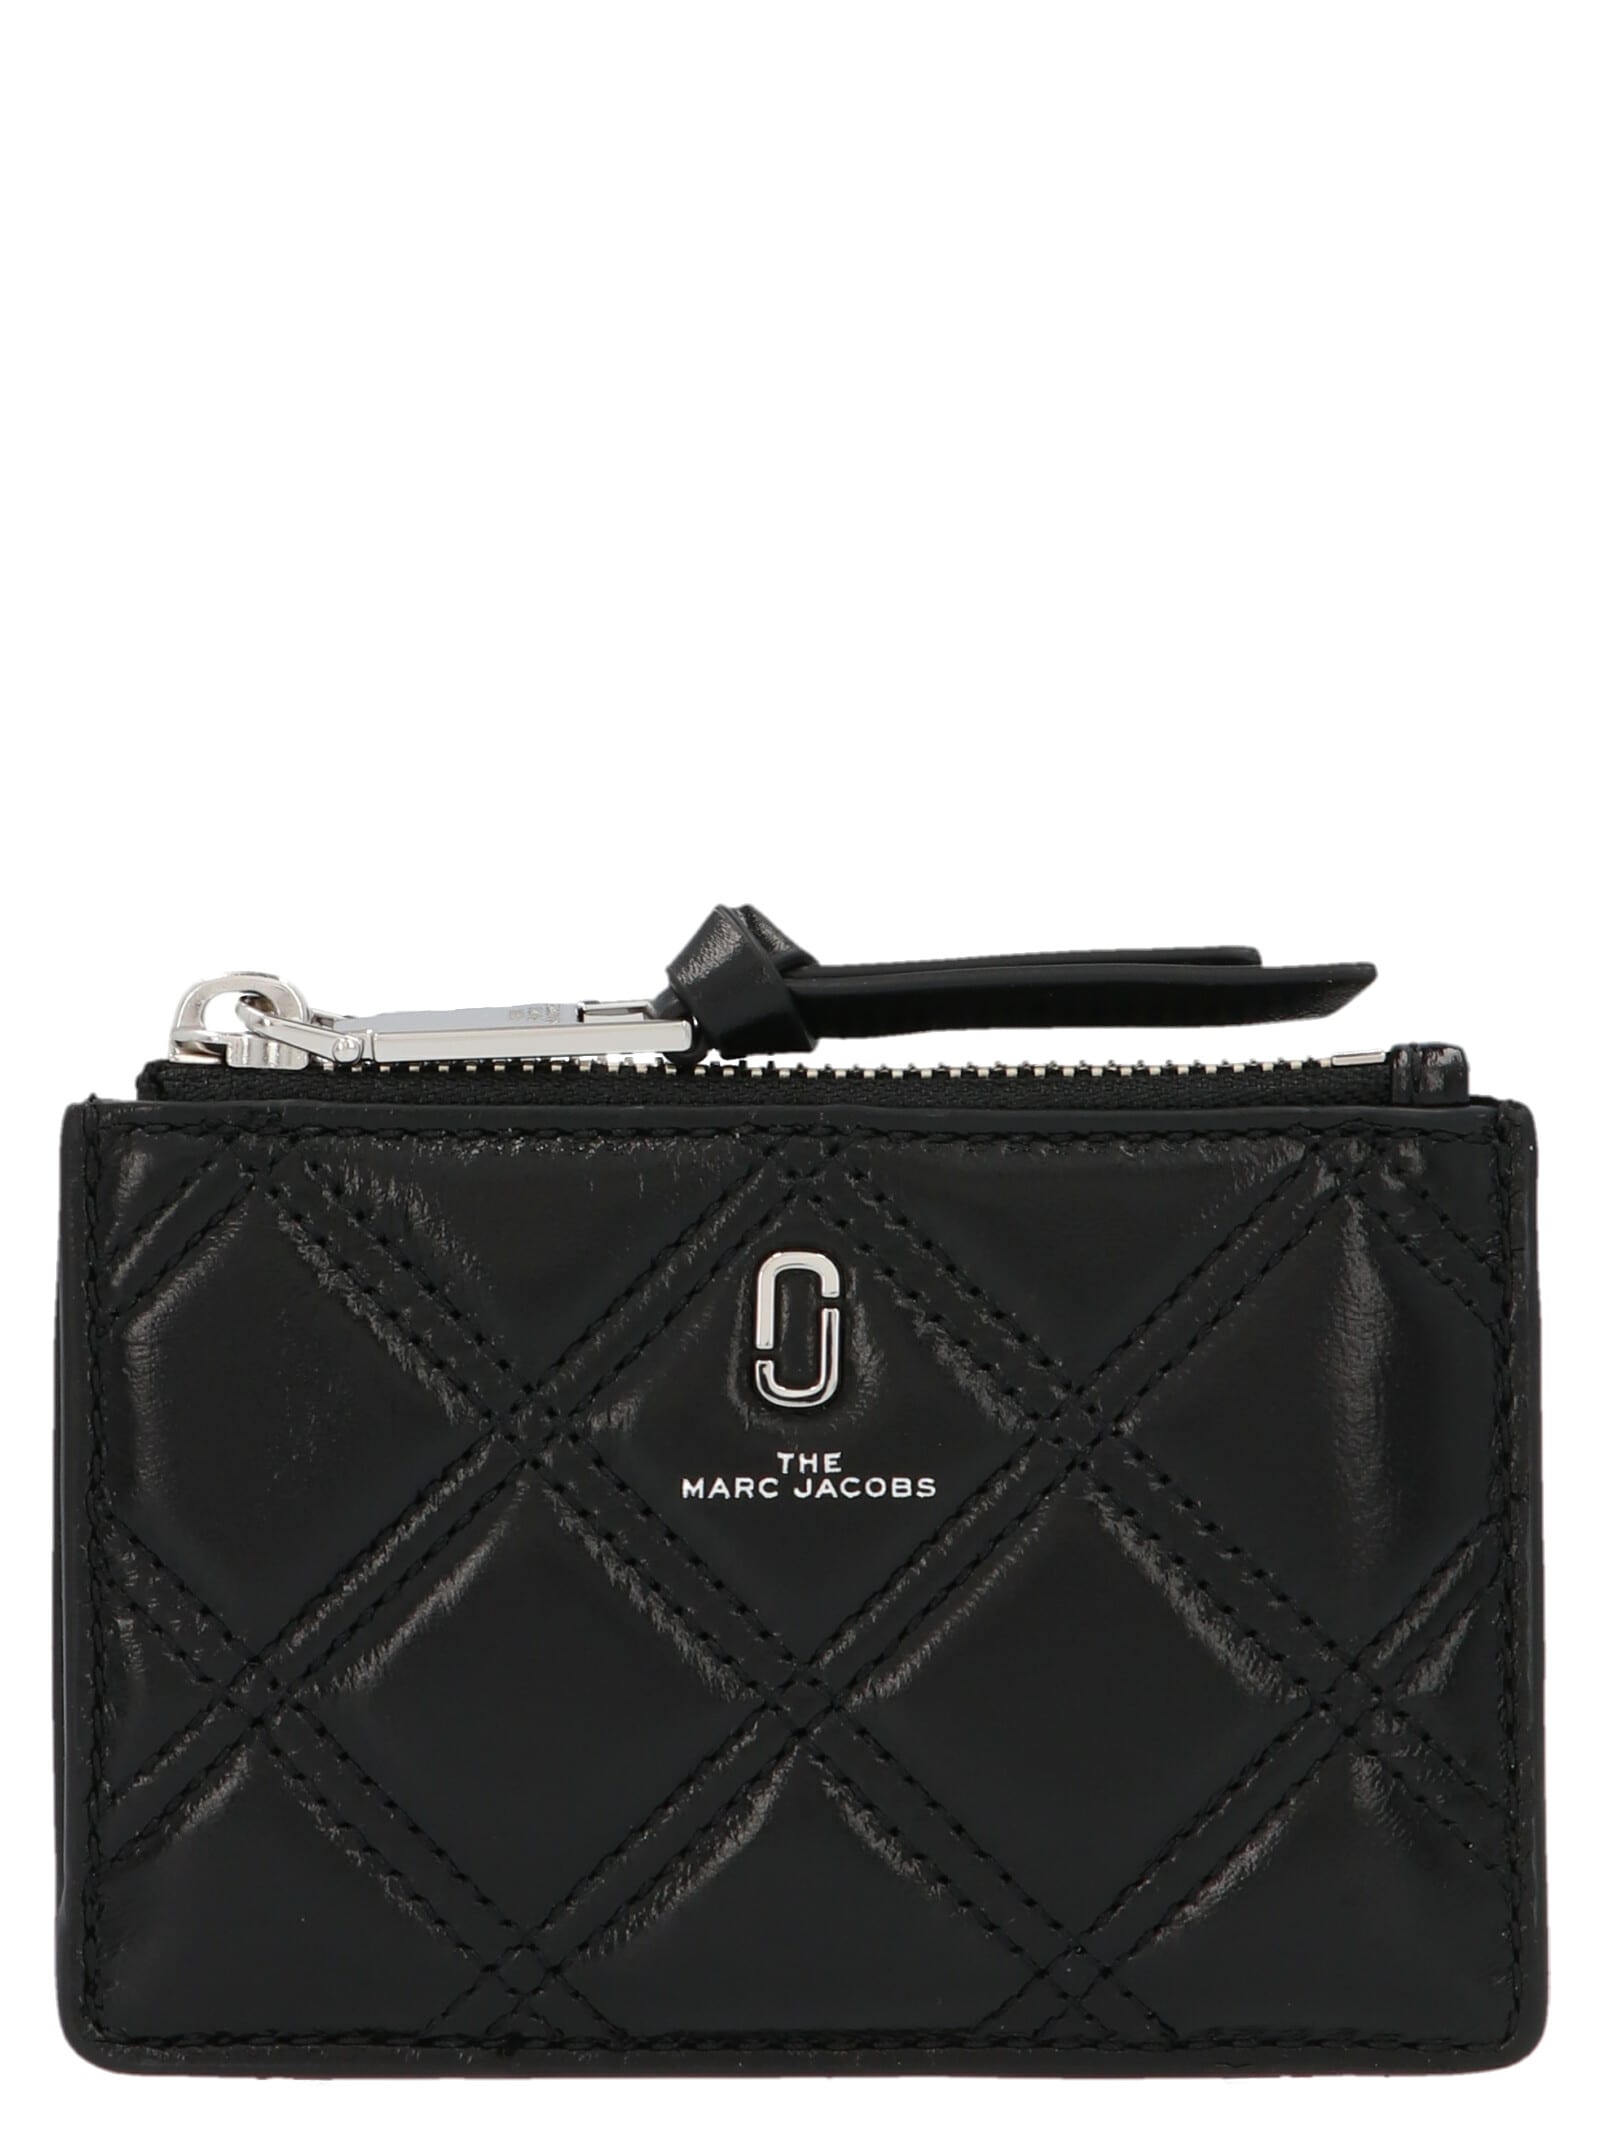 MARC JACOBS THE QUILTED SOFTSHOT WALLET,M0015865 001